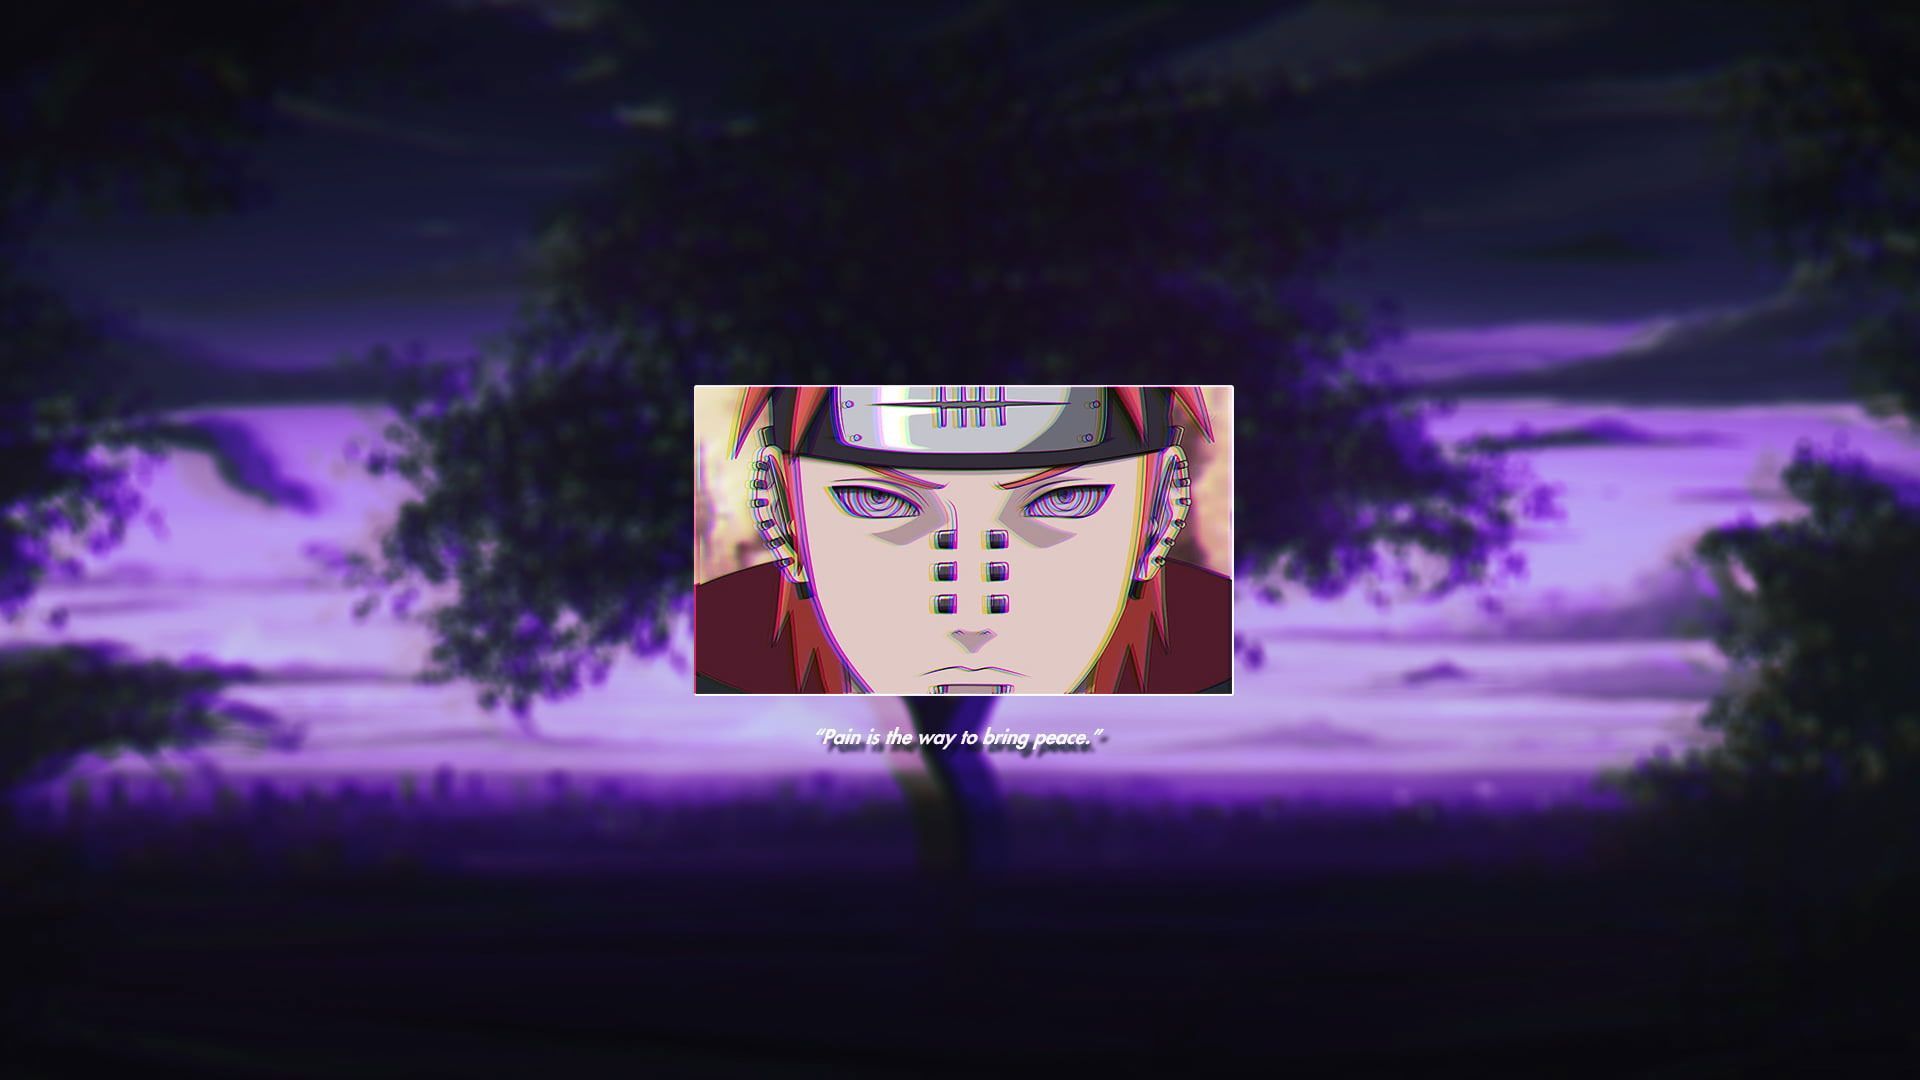 Naruto (anime) wallpaper, purple background, VHS, anime boys, Rinnegan. Anime wallpaper 1920x Anime wallpaper, Android wallpaper anime